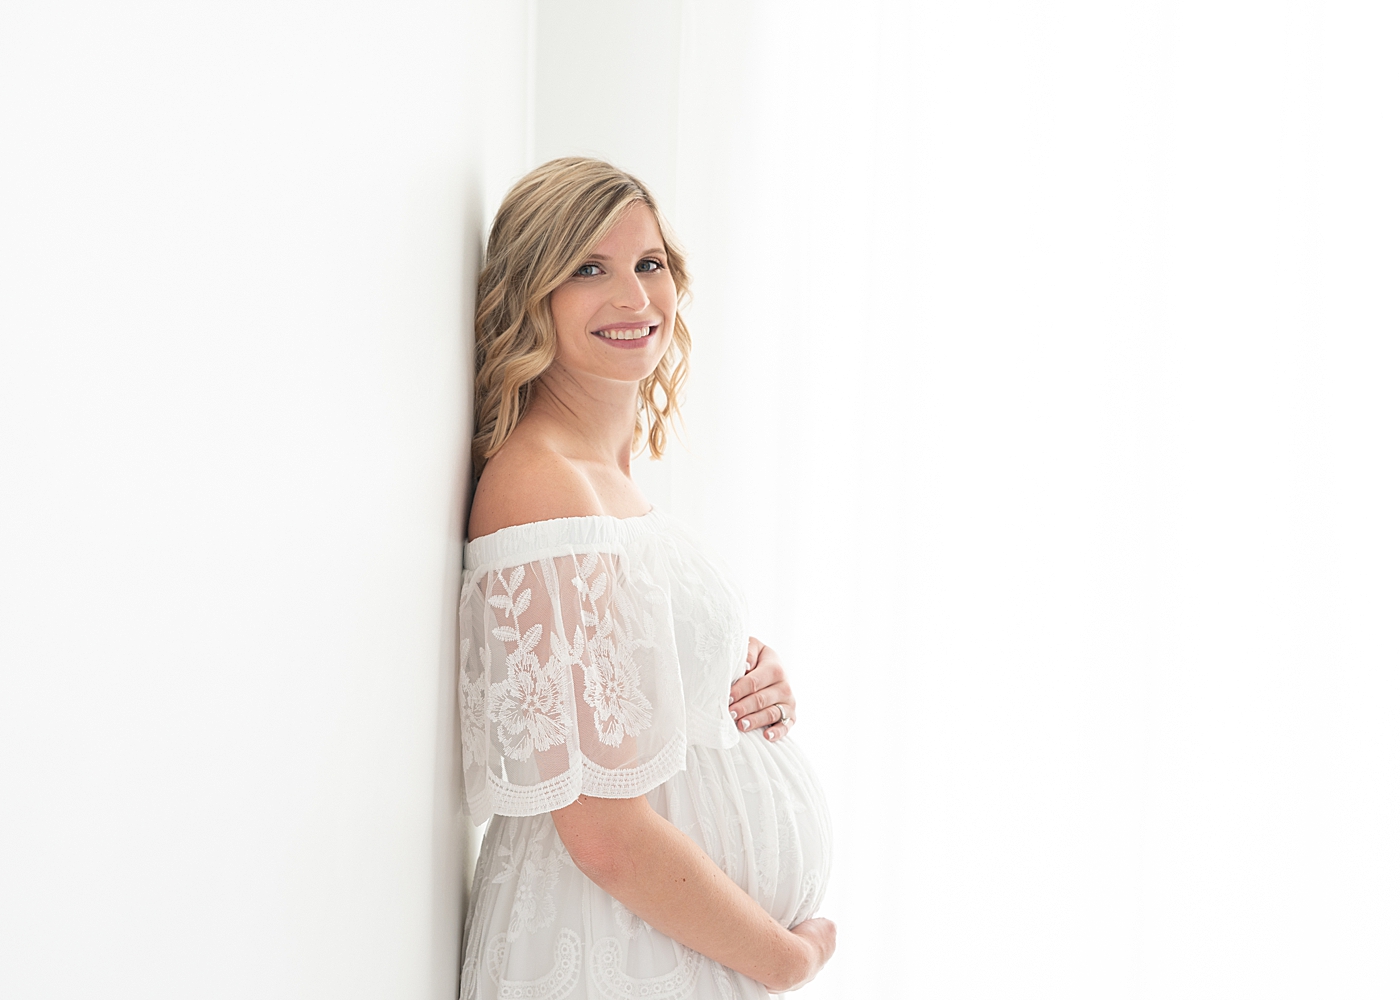 All white maternity session in light and airy photography studio in Chagrin Falls. Photos by Rachel Brookes Photography.